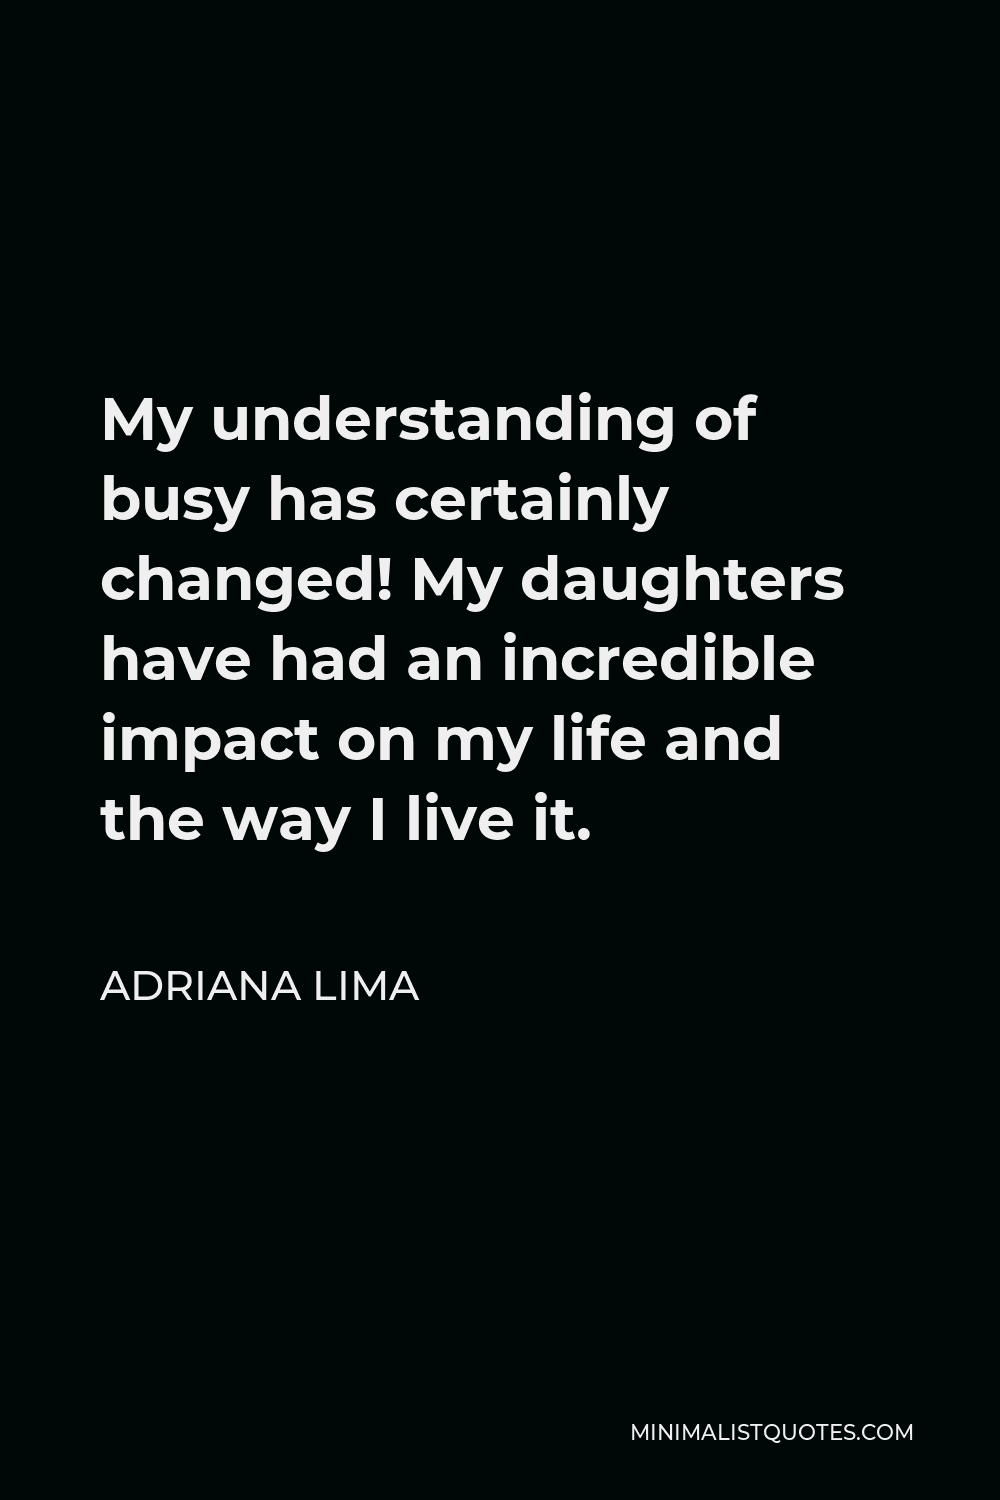 Adriana Lima Quote - My understanding of busy has certainly changed! My daughters have had an incredible impact on my life and the way I live it.